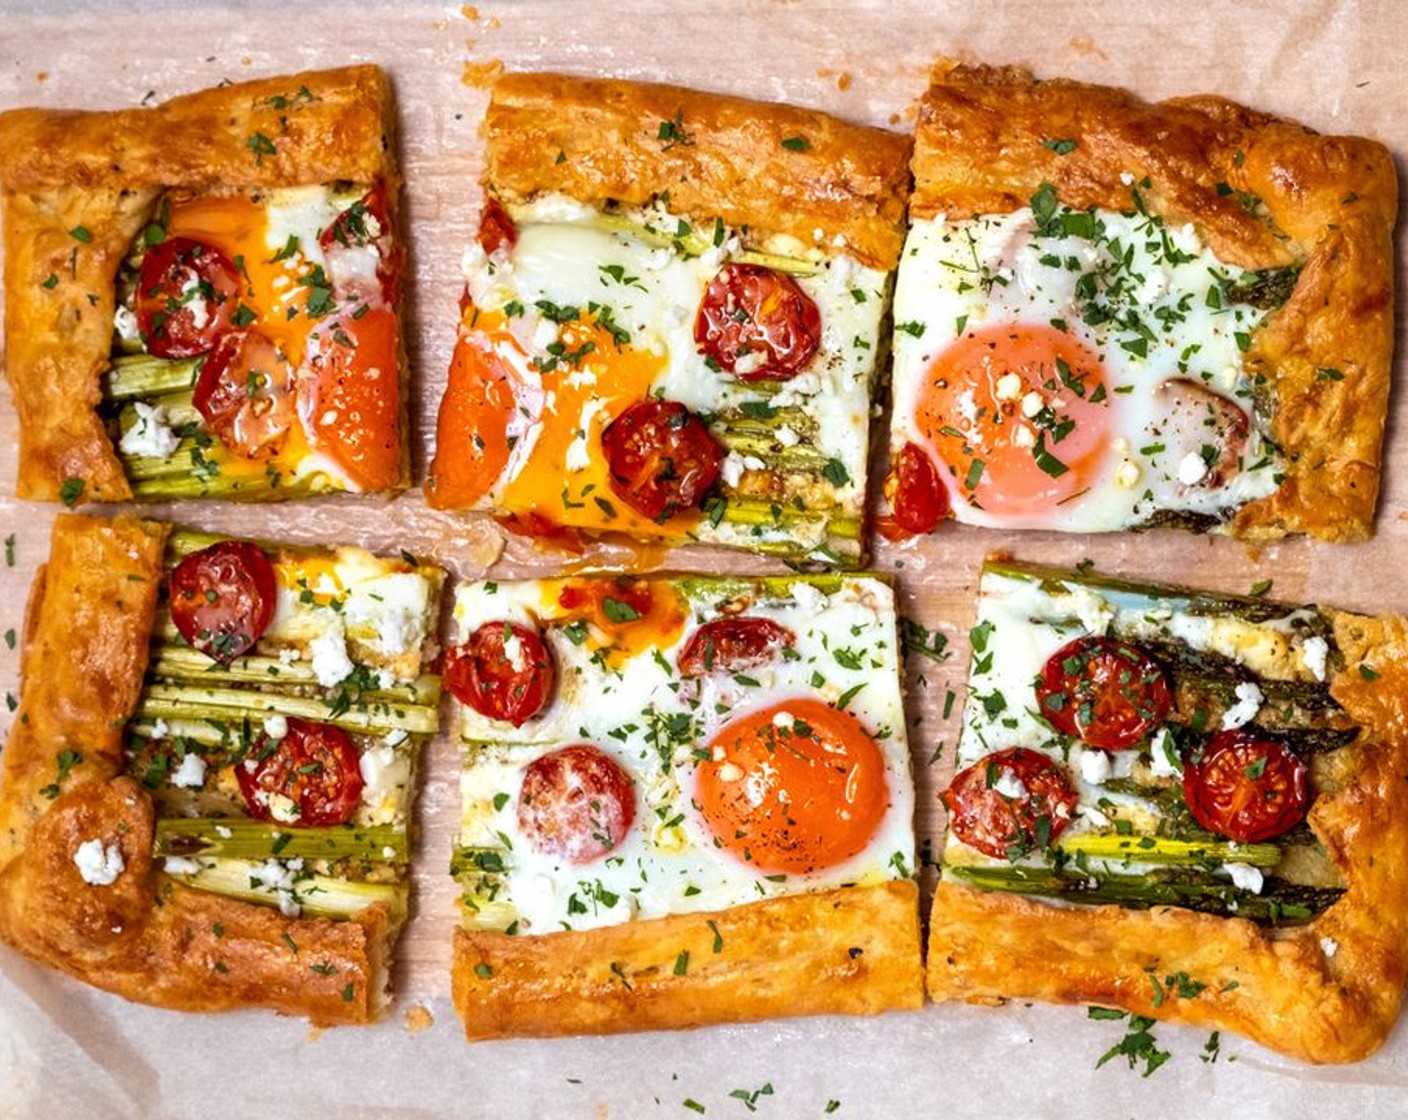 Asparagus Galette with Cherry Tomato and Baked Egg